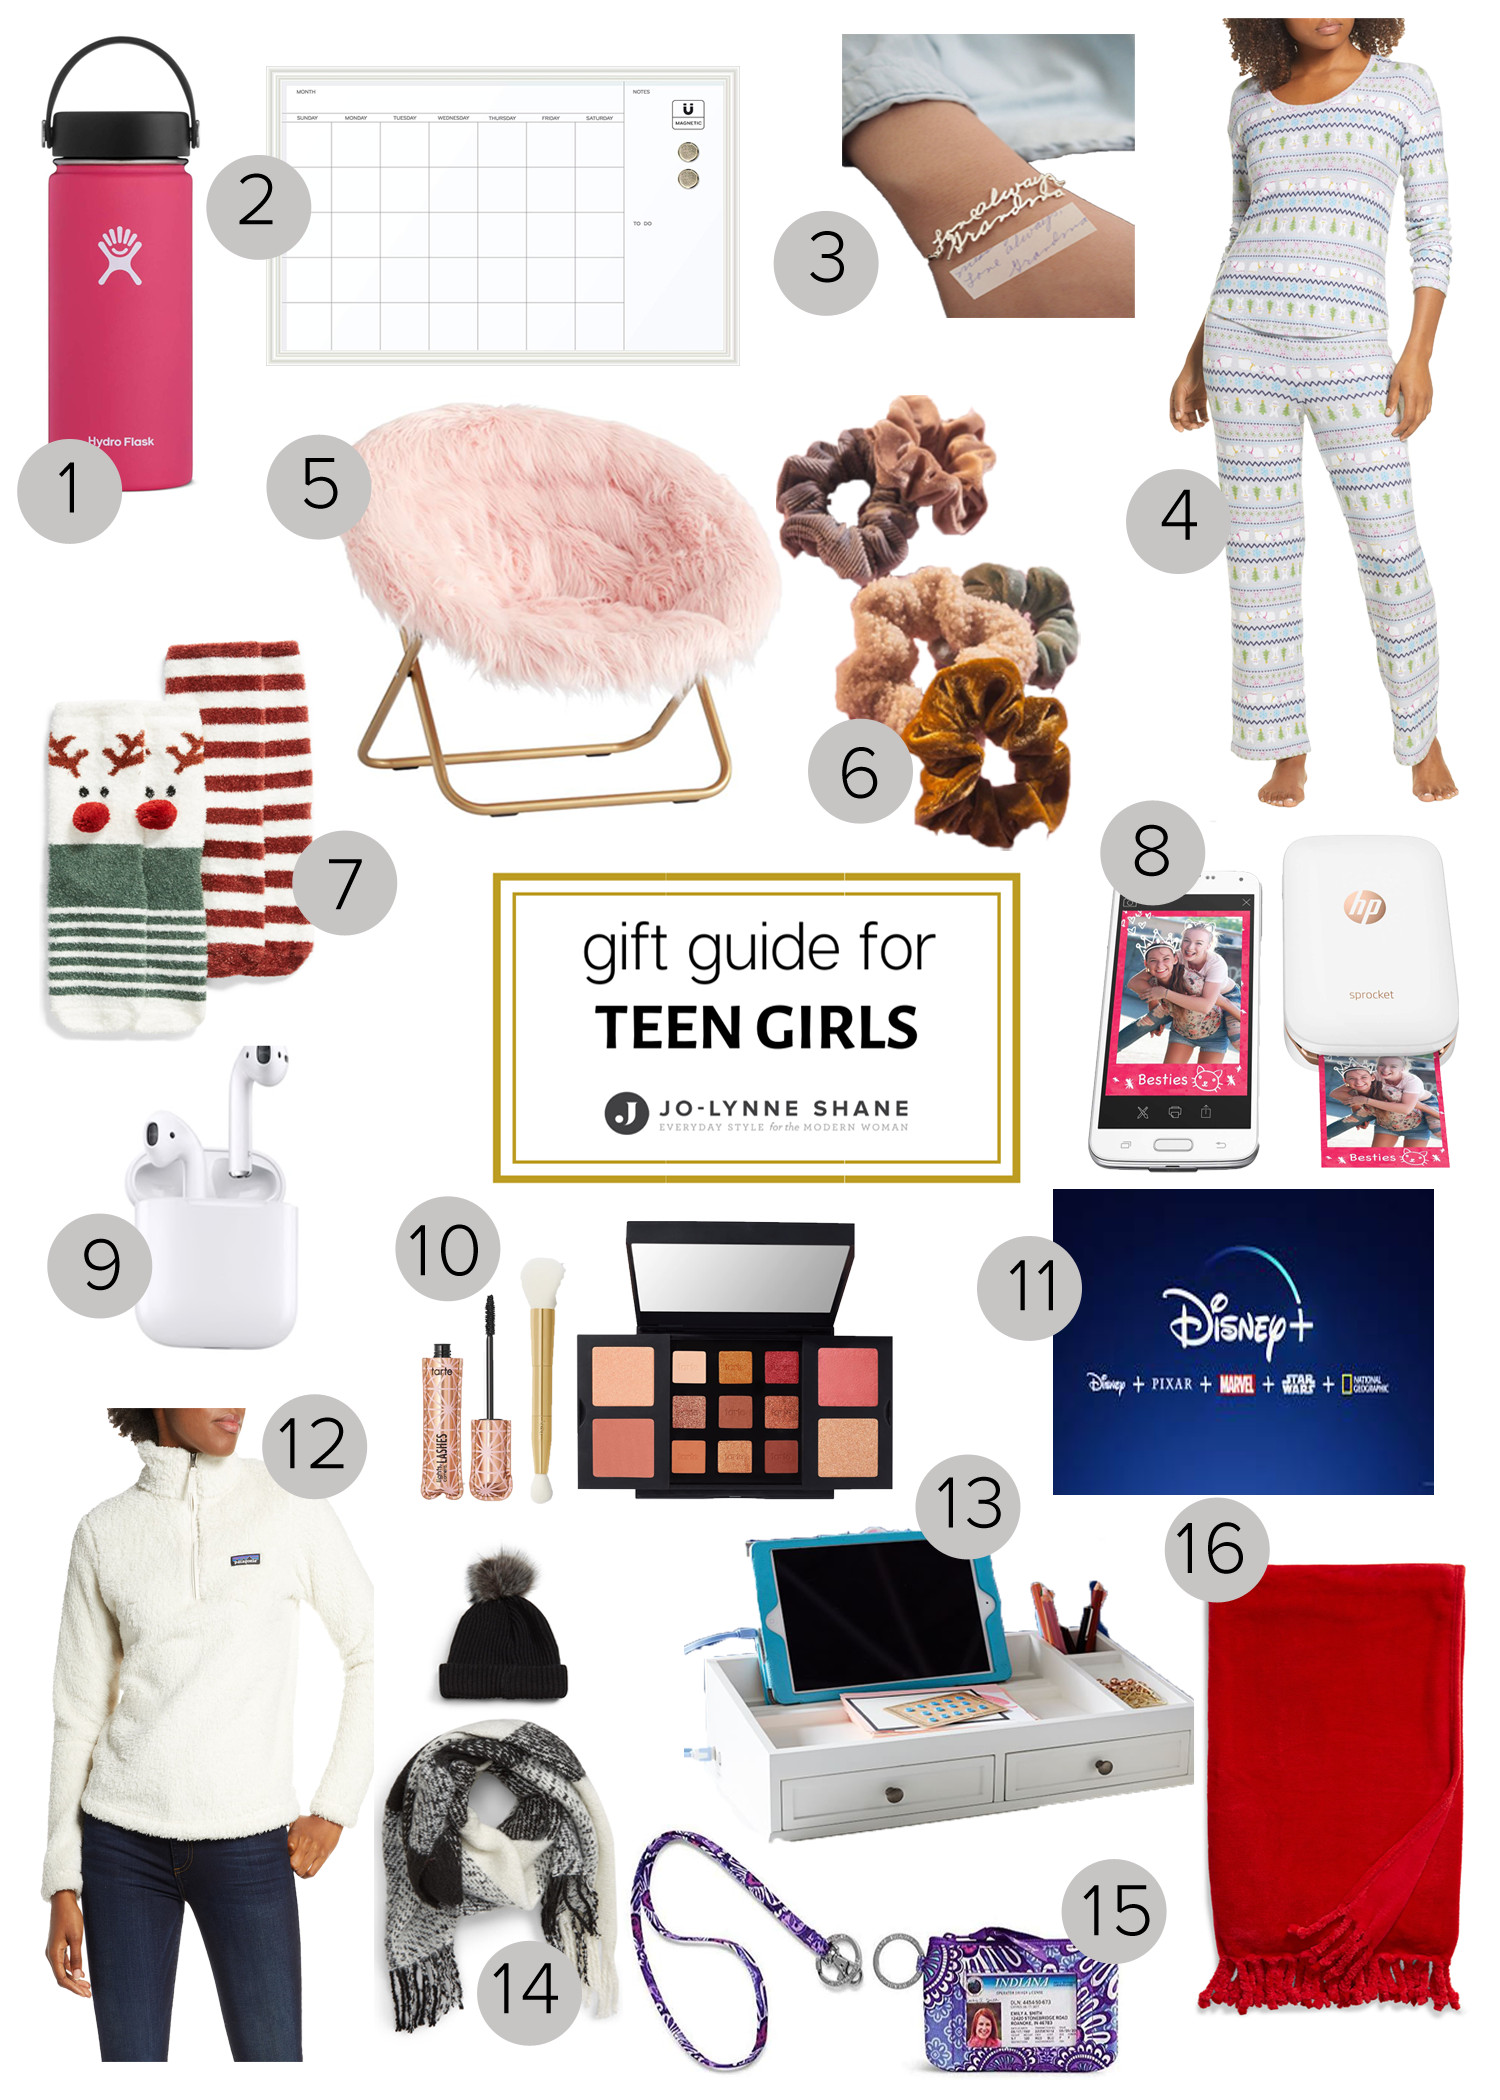 Xmas Gift Ideas For Girls
 Holiday Gift Ideas for Teen Girls